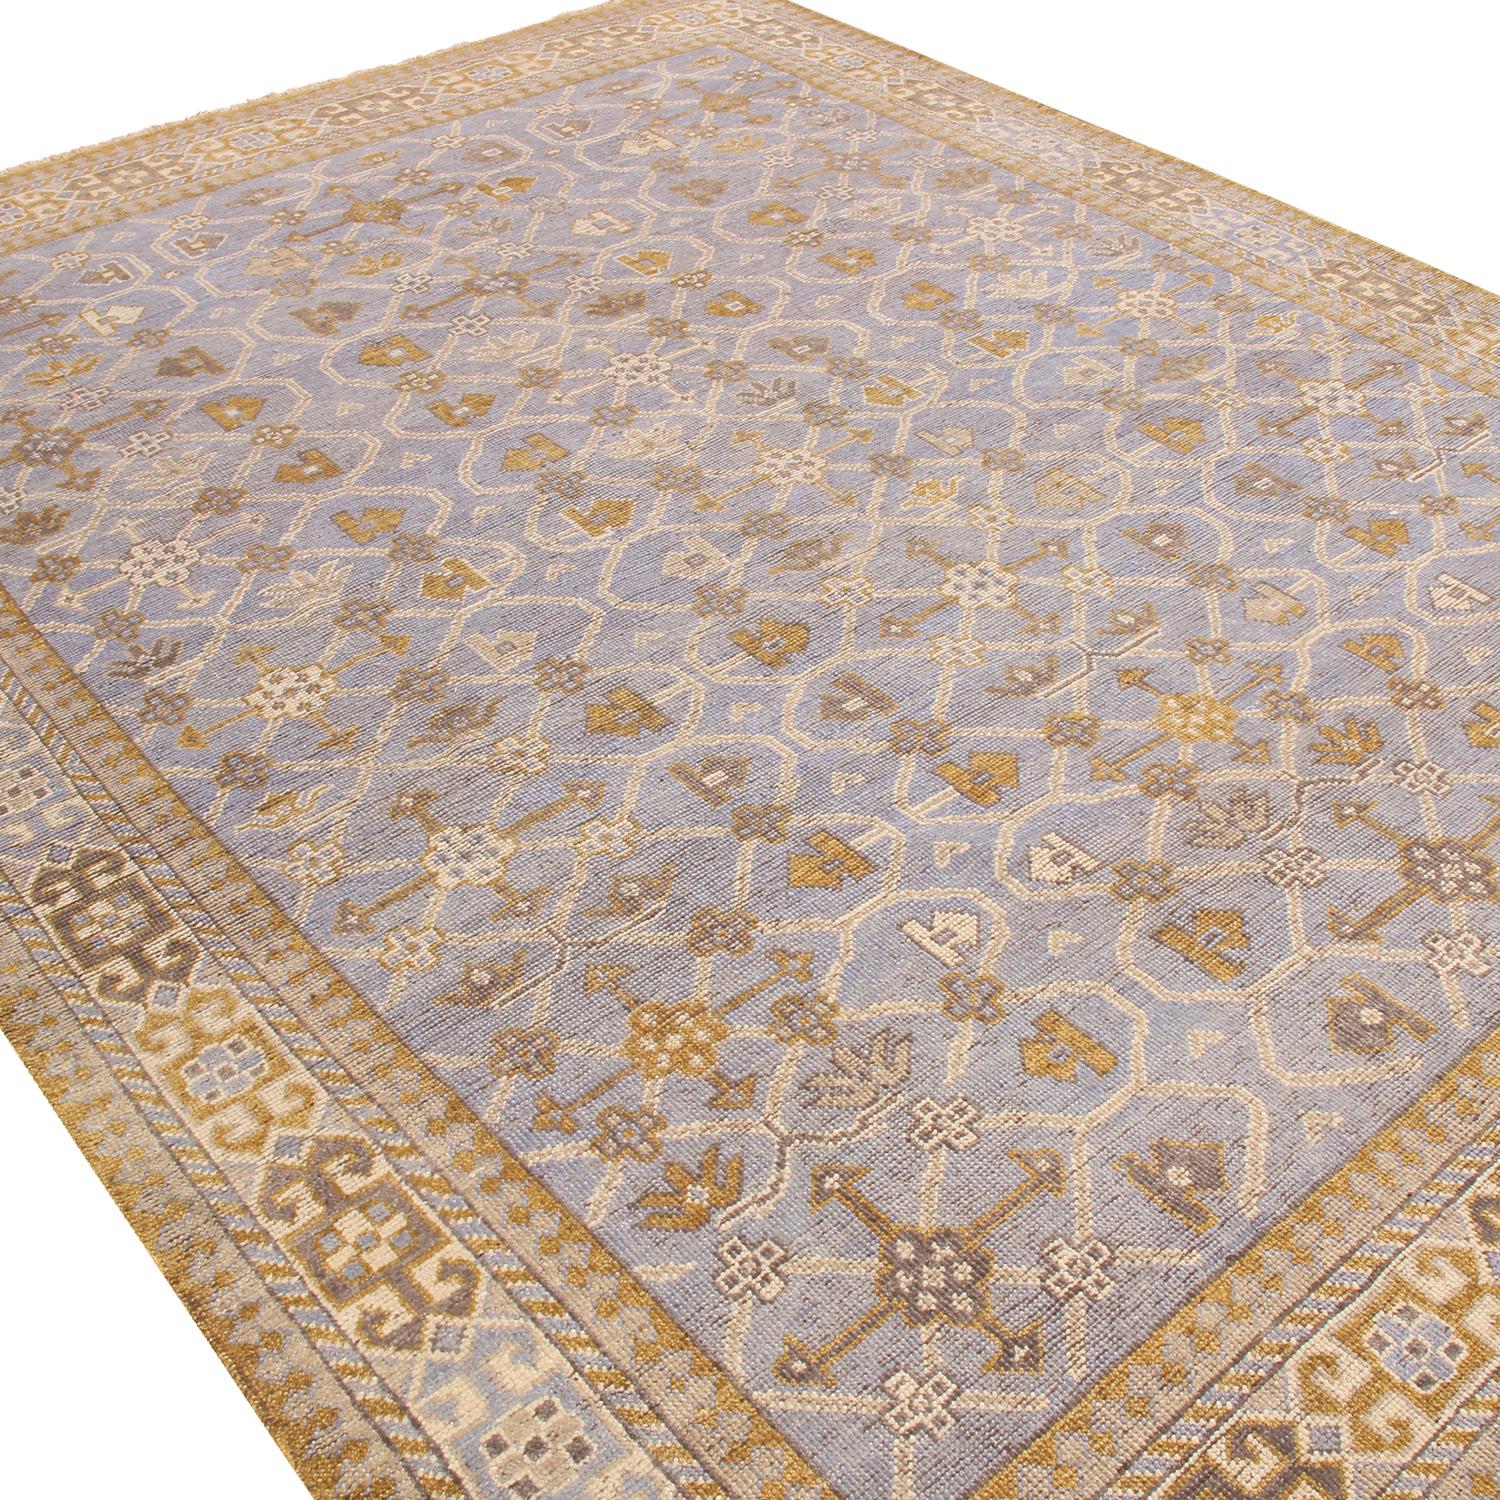 Hand knotted with high-quality wool in India, this rug originates from Rug & Kilim’s premier Burano collection, marrying a visually striking, luminous blue field background with an equally intricate beige border with ram’s Horn motifs, traditional